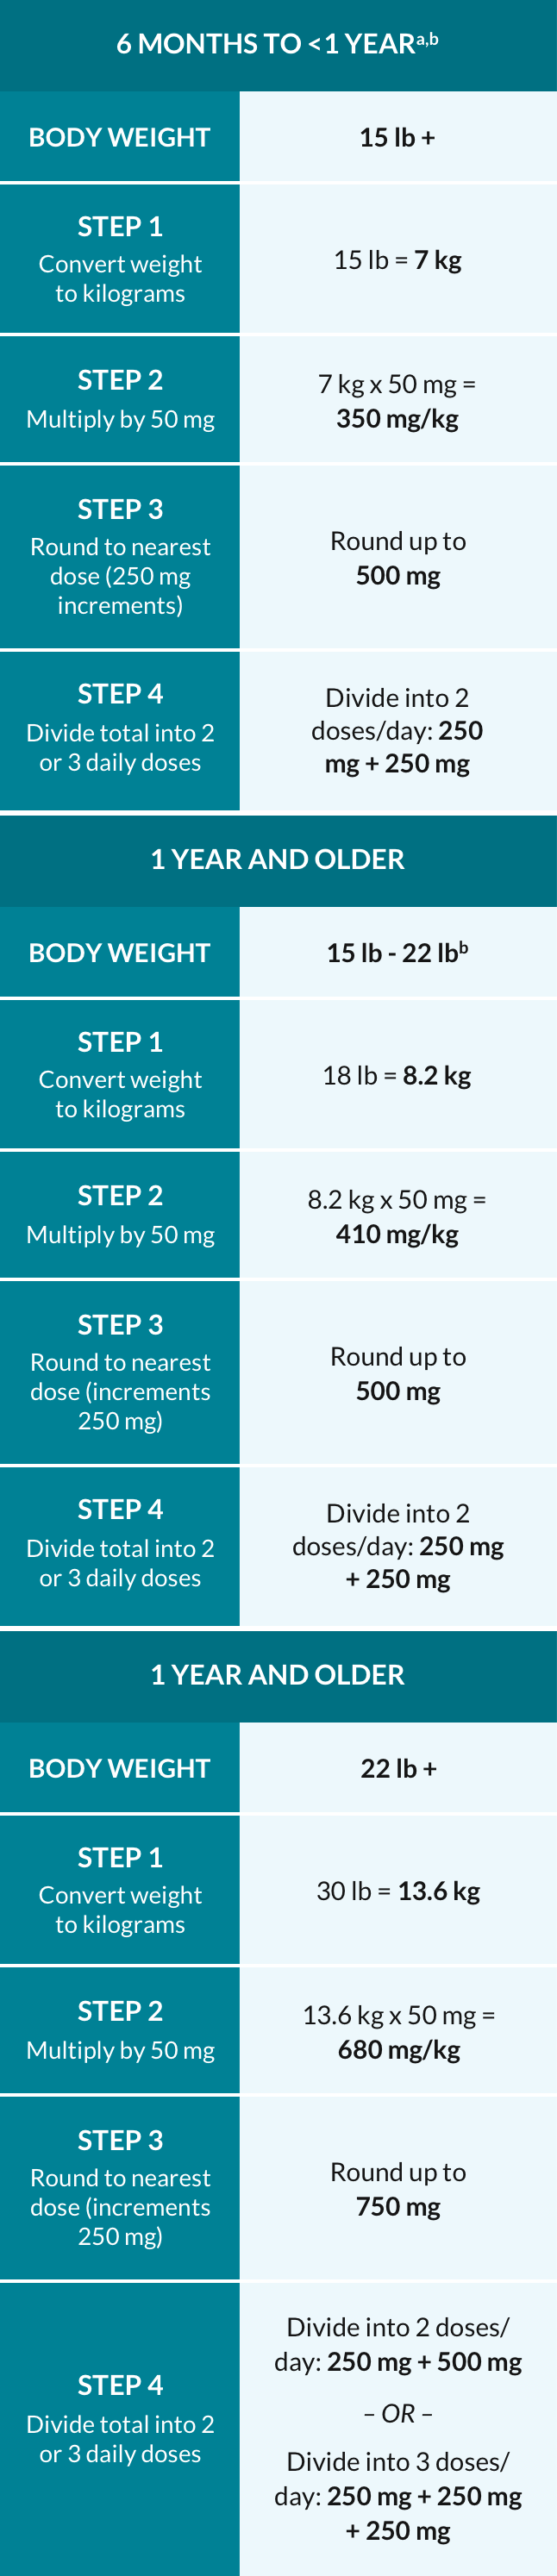 Table of DIACOMIT dosing recommendations based on patient age and weight.